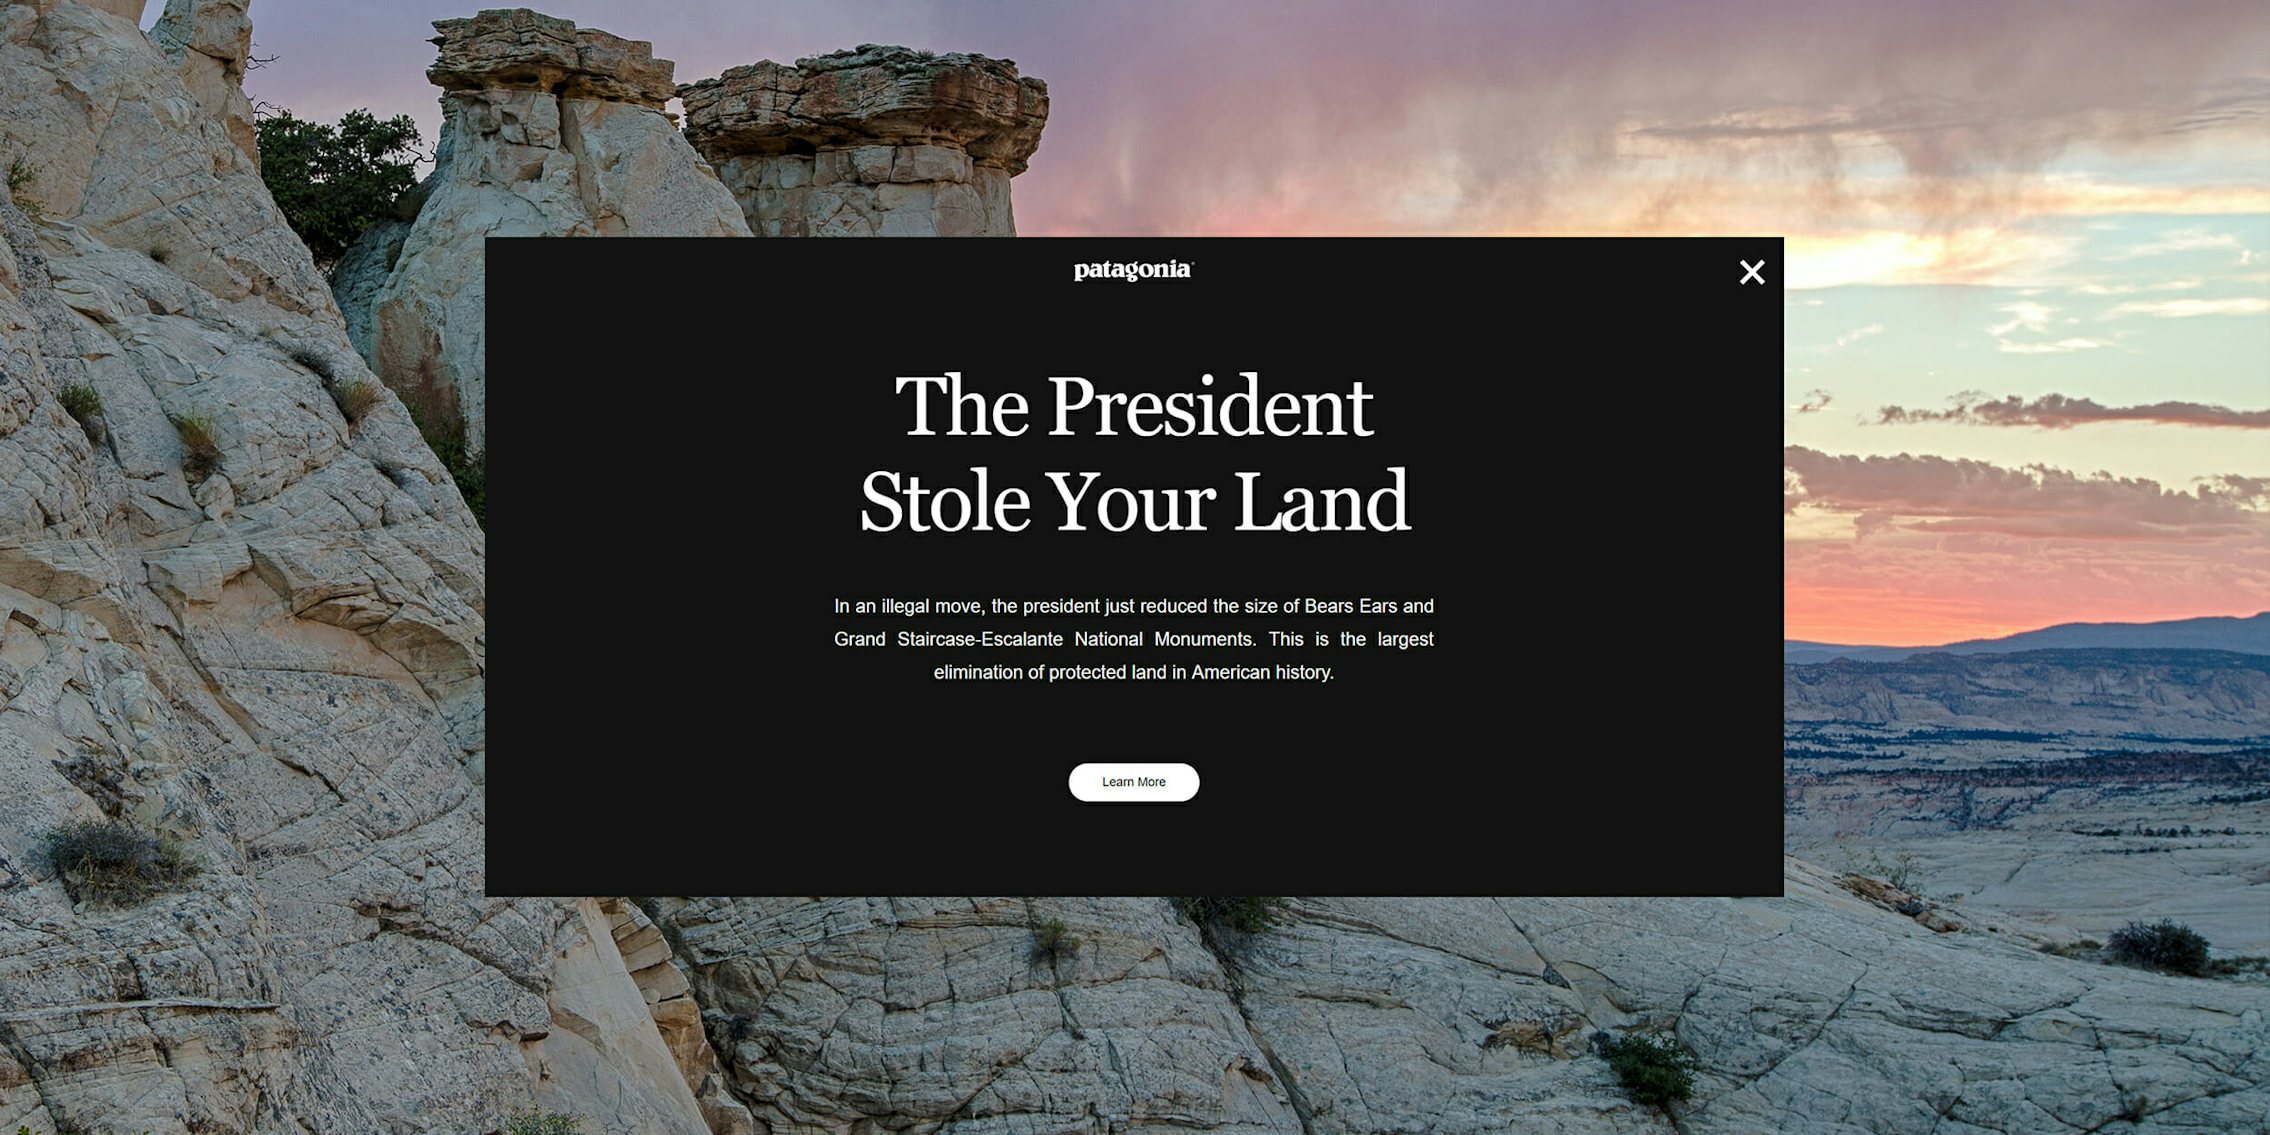 Patagonia 'The President Stole Your Land' post over Grand Staircase-Escalante National Monument